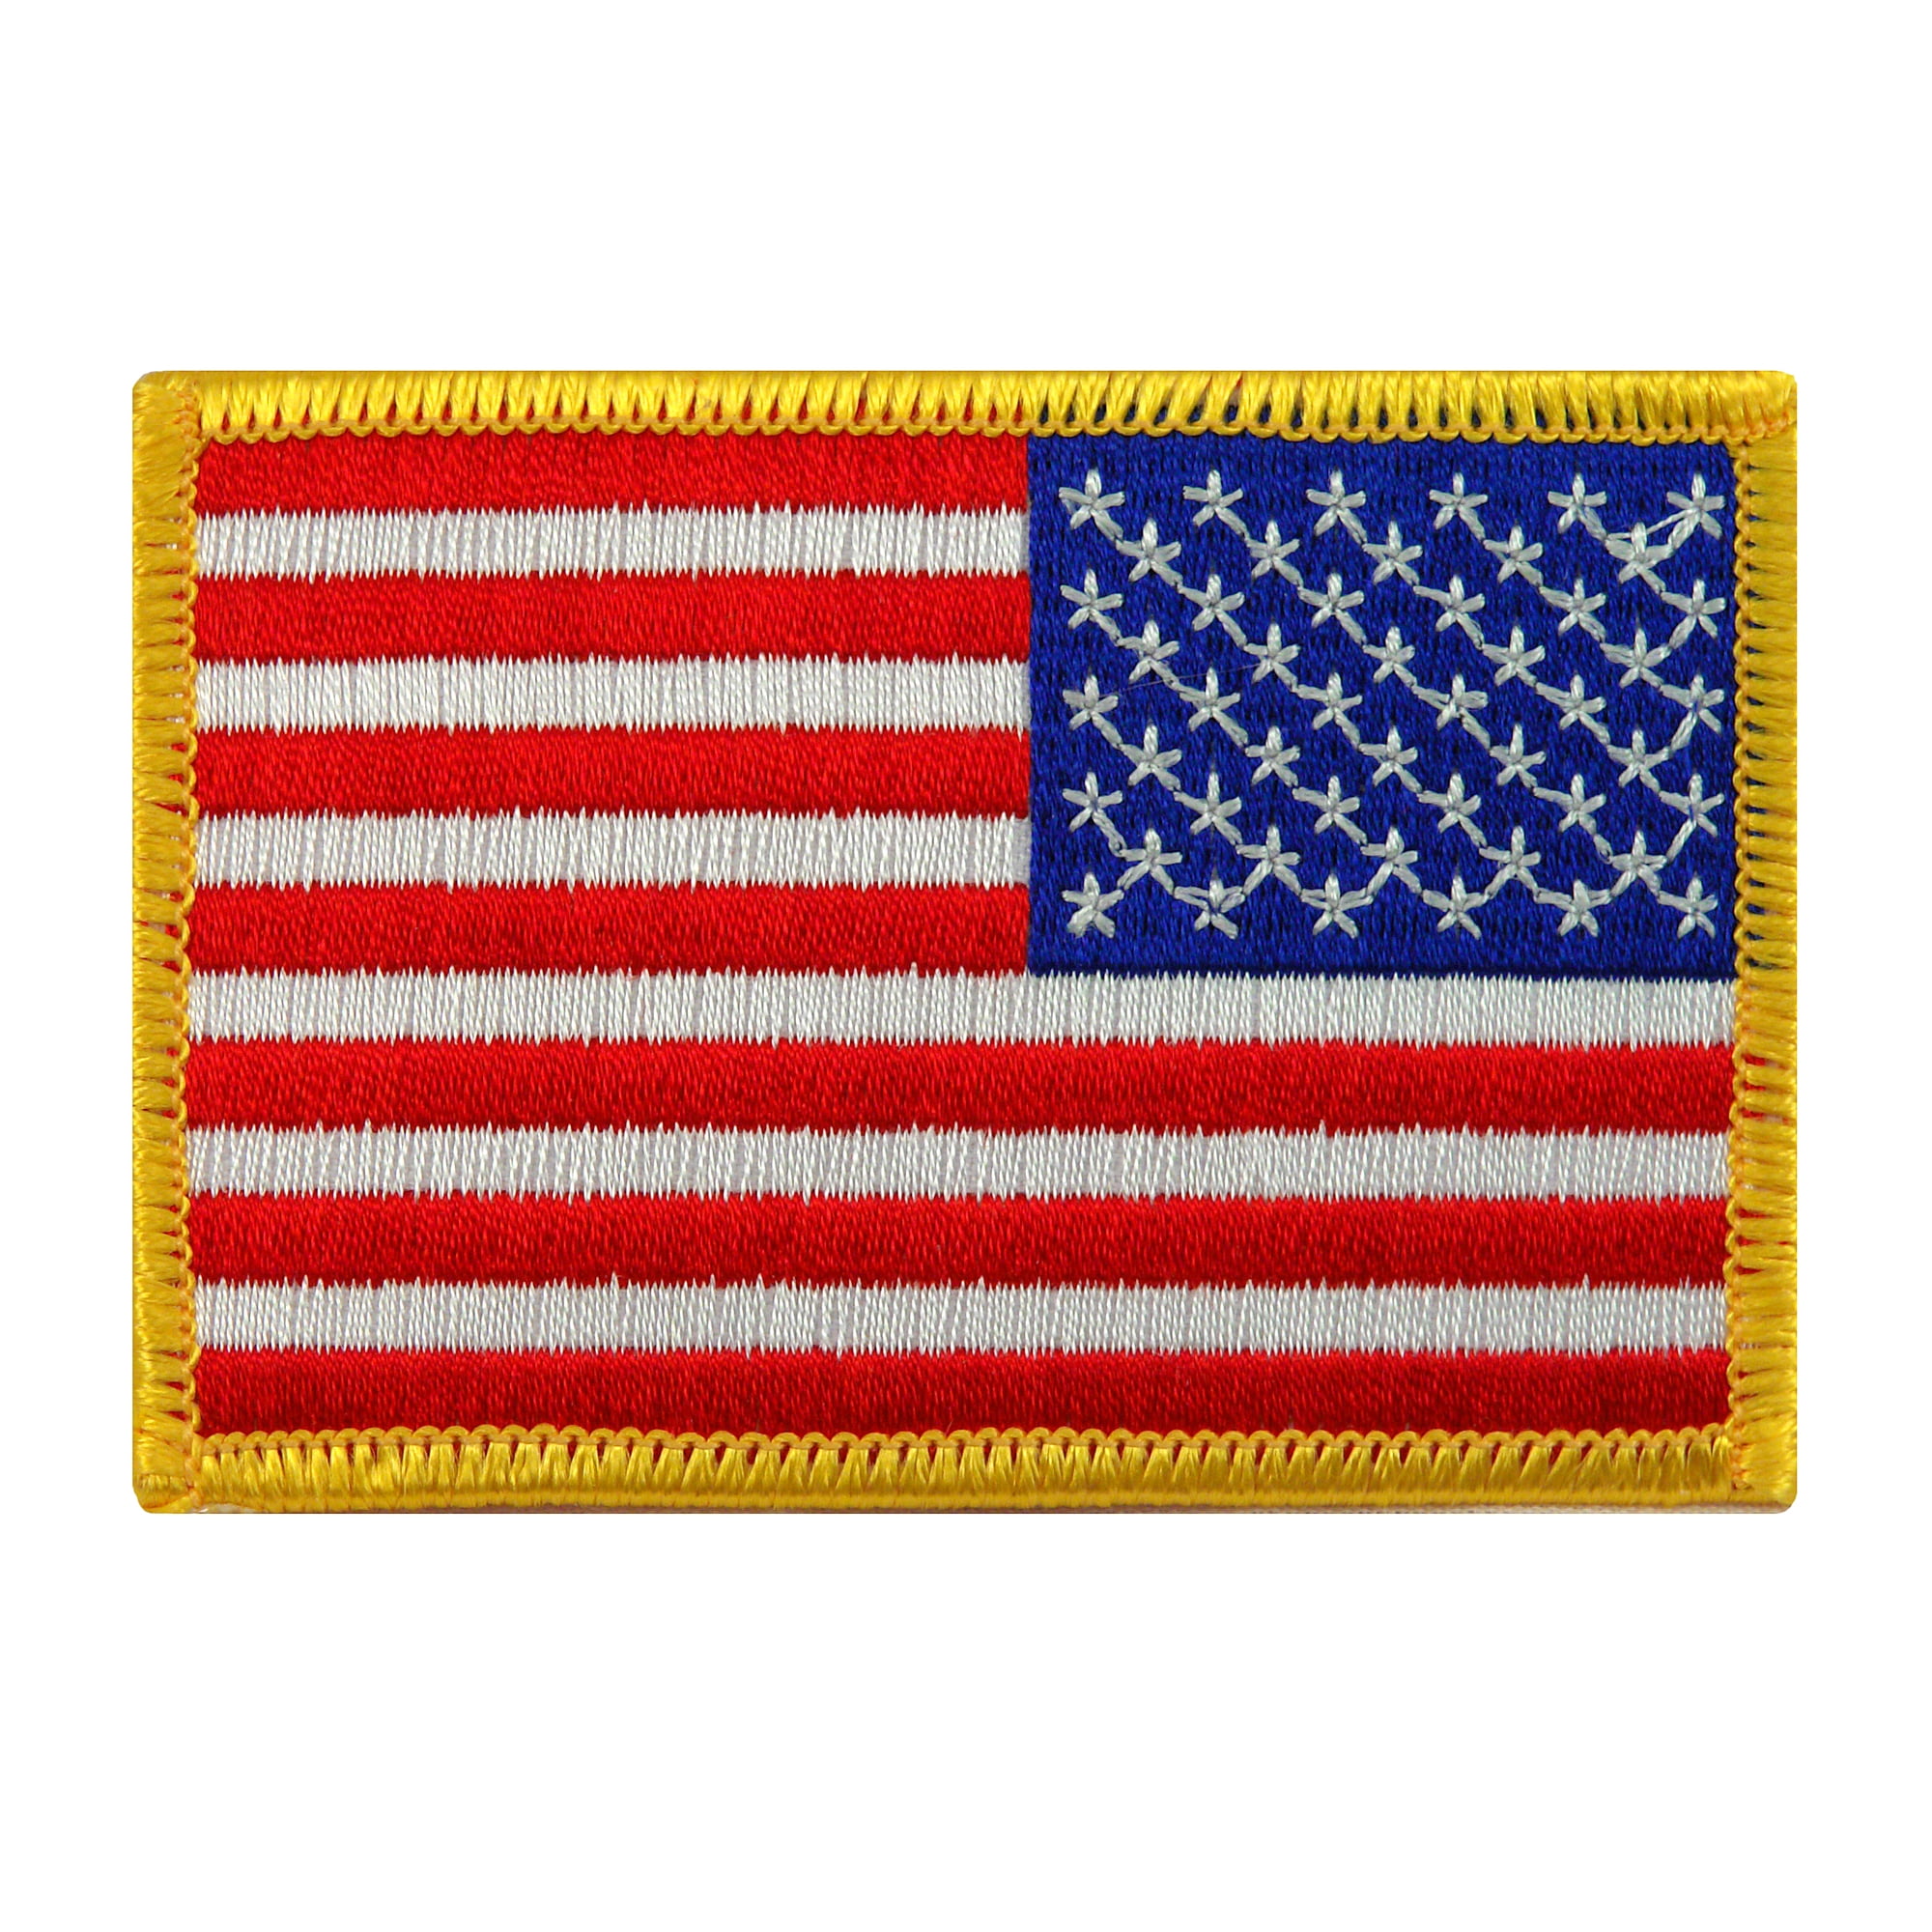 IDOGEAR American Flag Embroided Morale Patch US Subdbued Shoulder Badge 